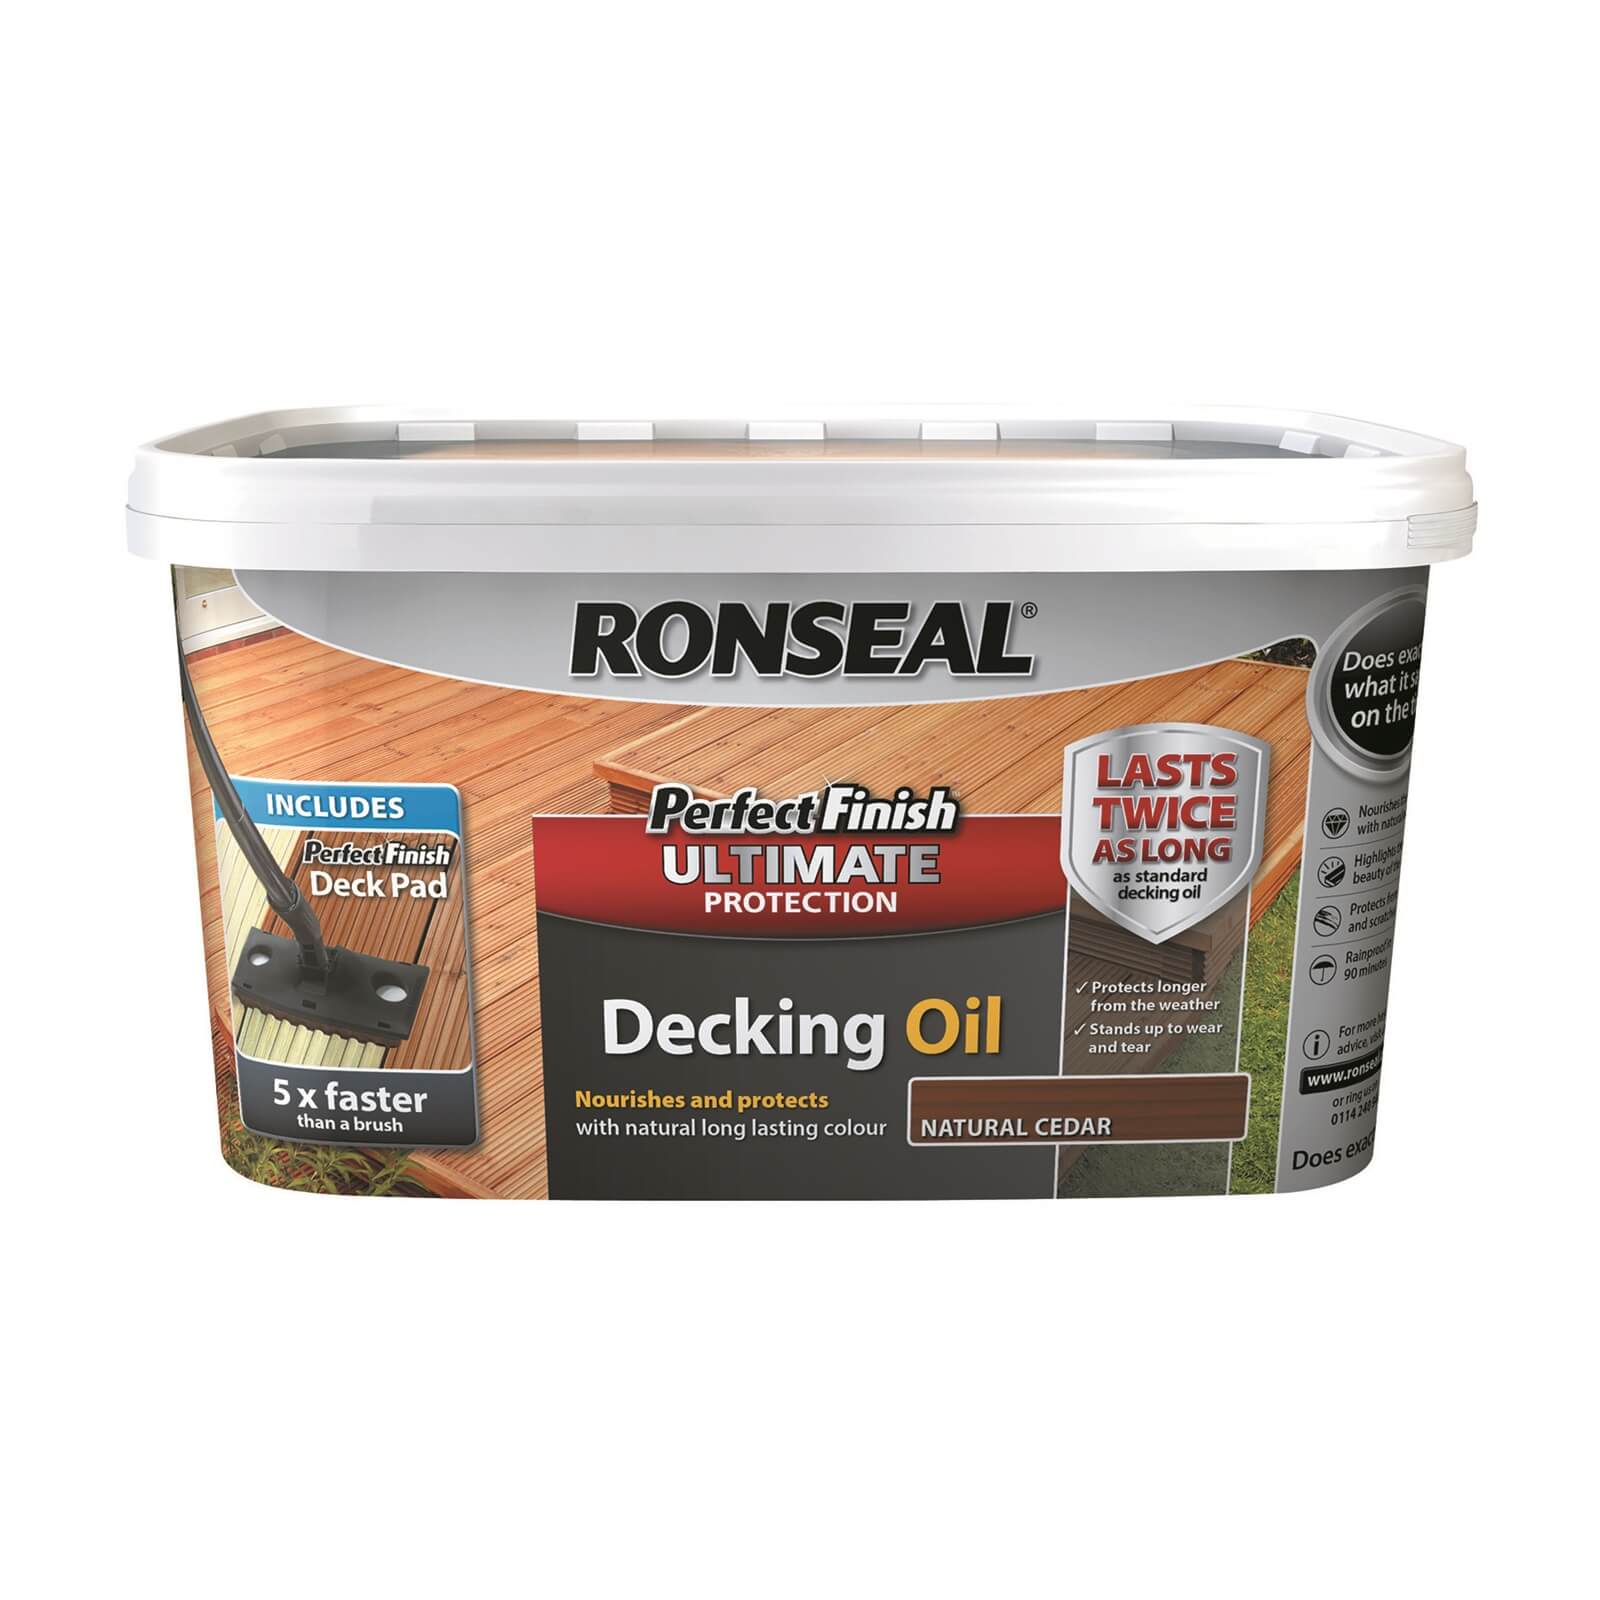 Ronseal Perfect Finish Ultimate Decking Oil - Natural Cedar